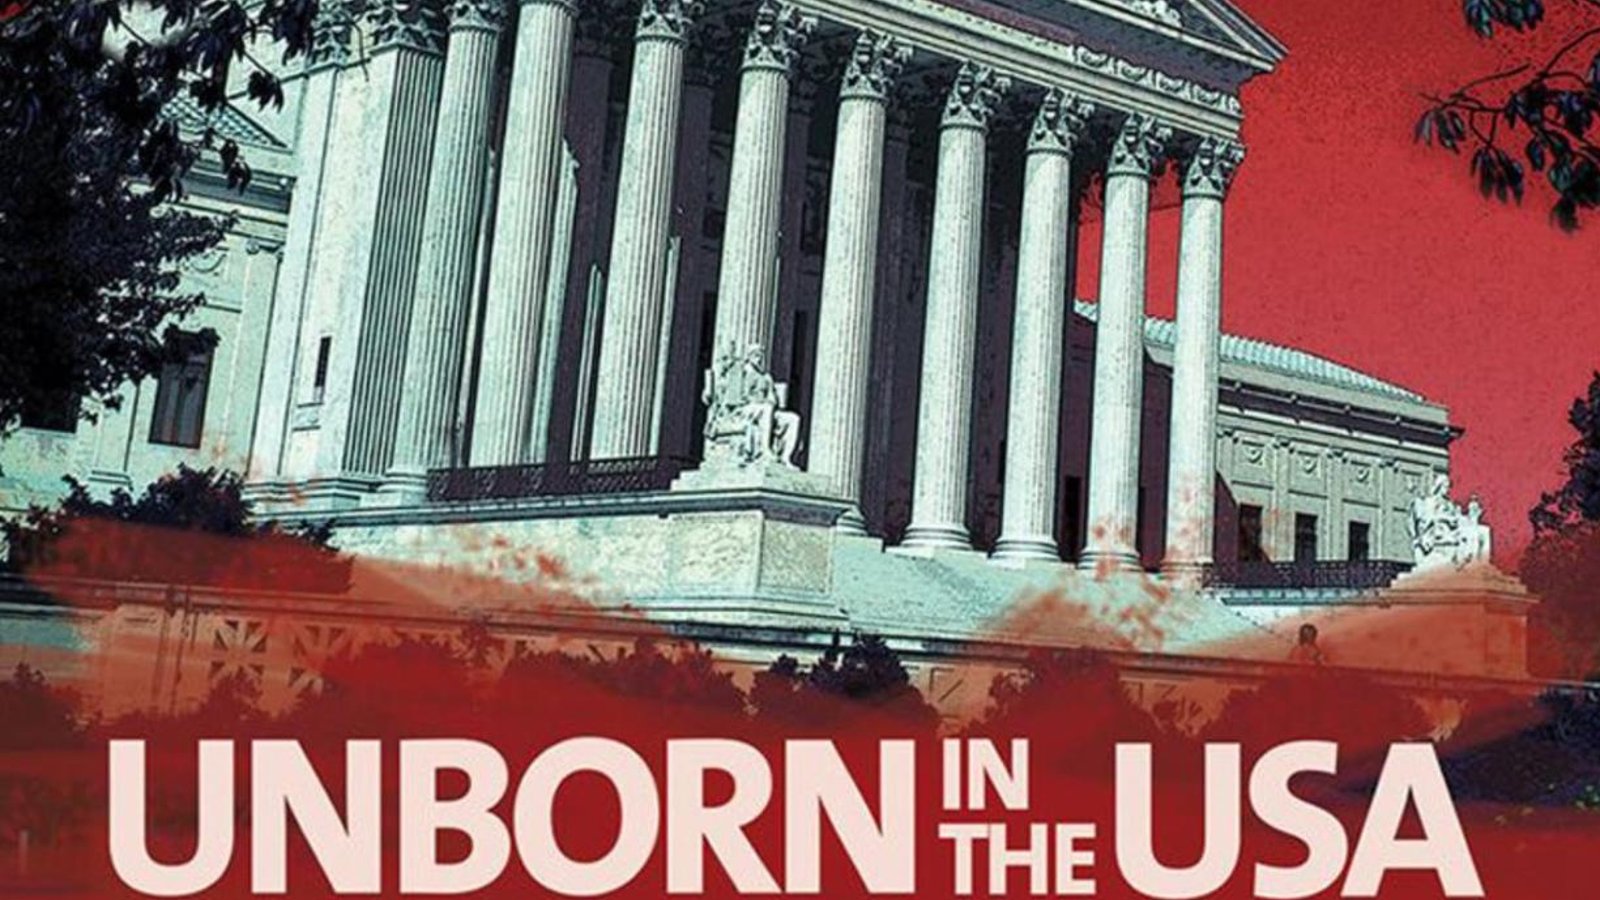 Unborn in the USA - A Riveting Look into the Pro-Life Movement